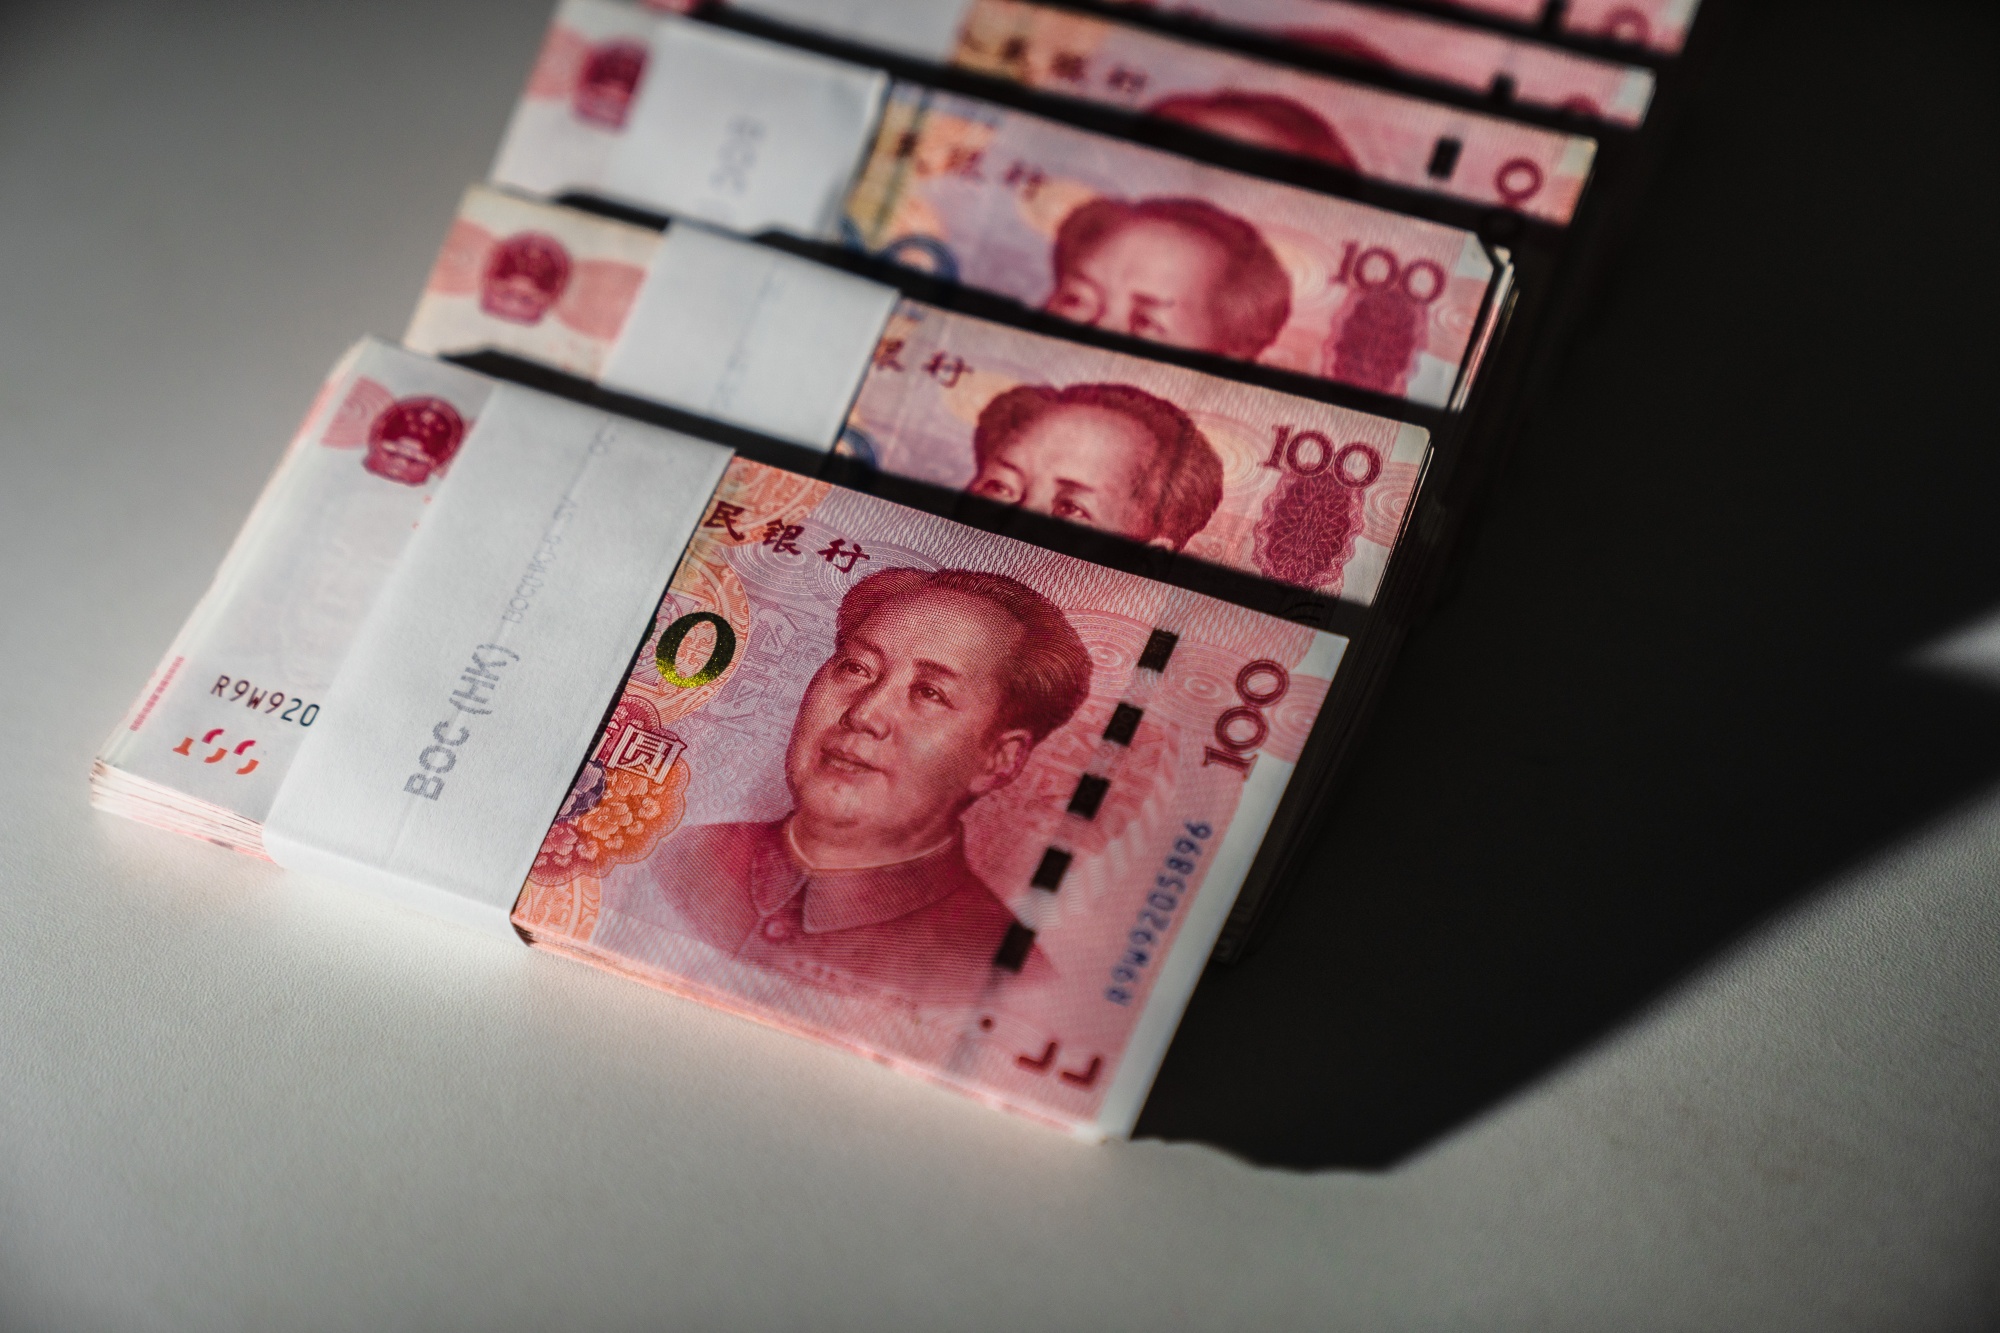 The&nbsp;yuan&nbsp;will weaken to test 7.30 per dollar by the end of this quarter, according to 10 analysts polled by Bloomberg.